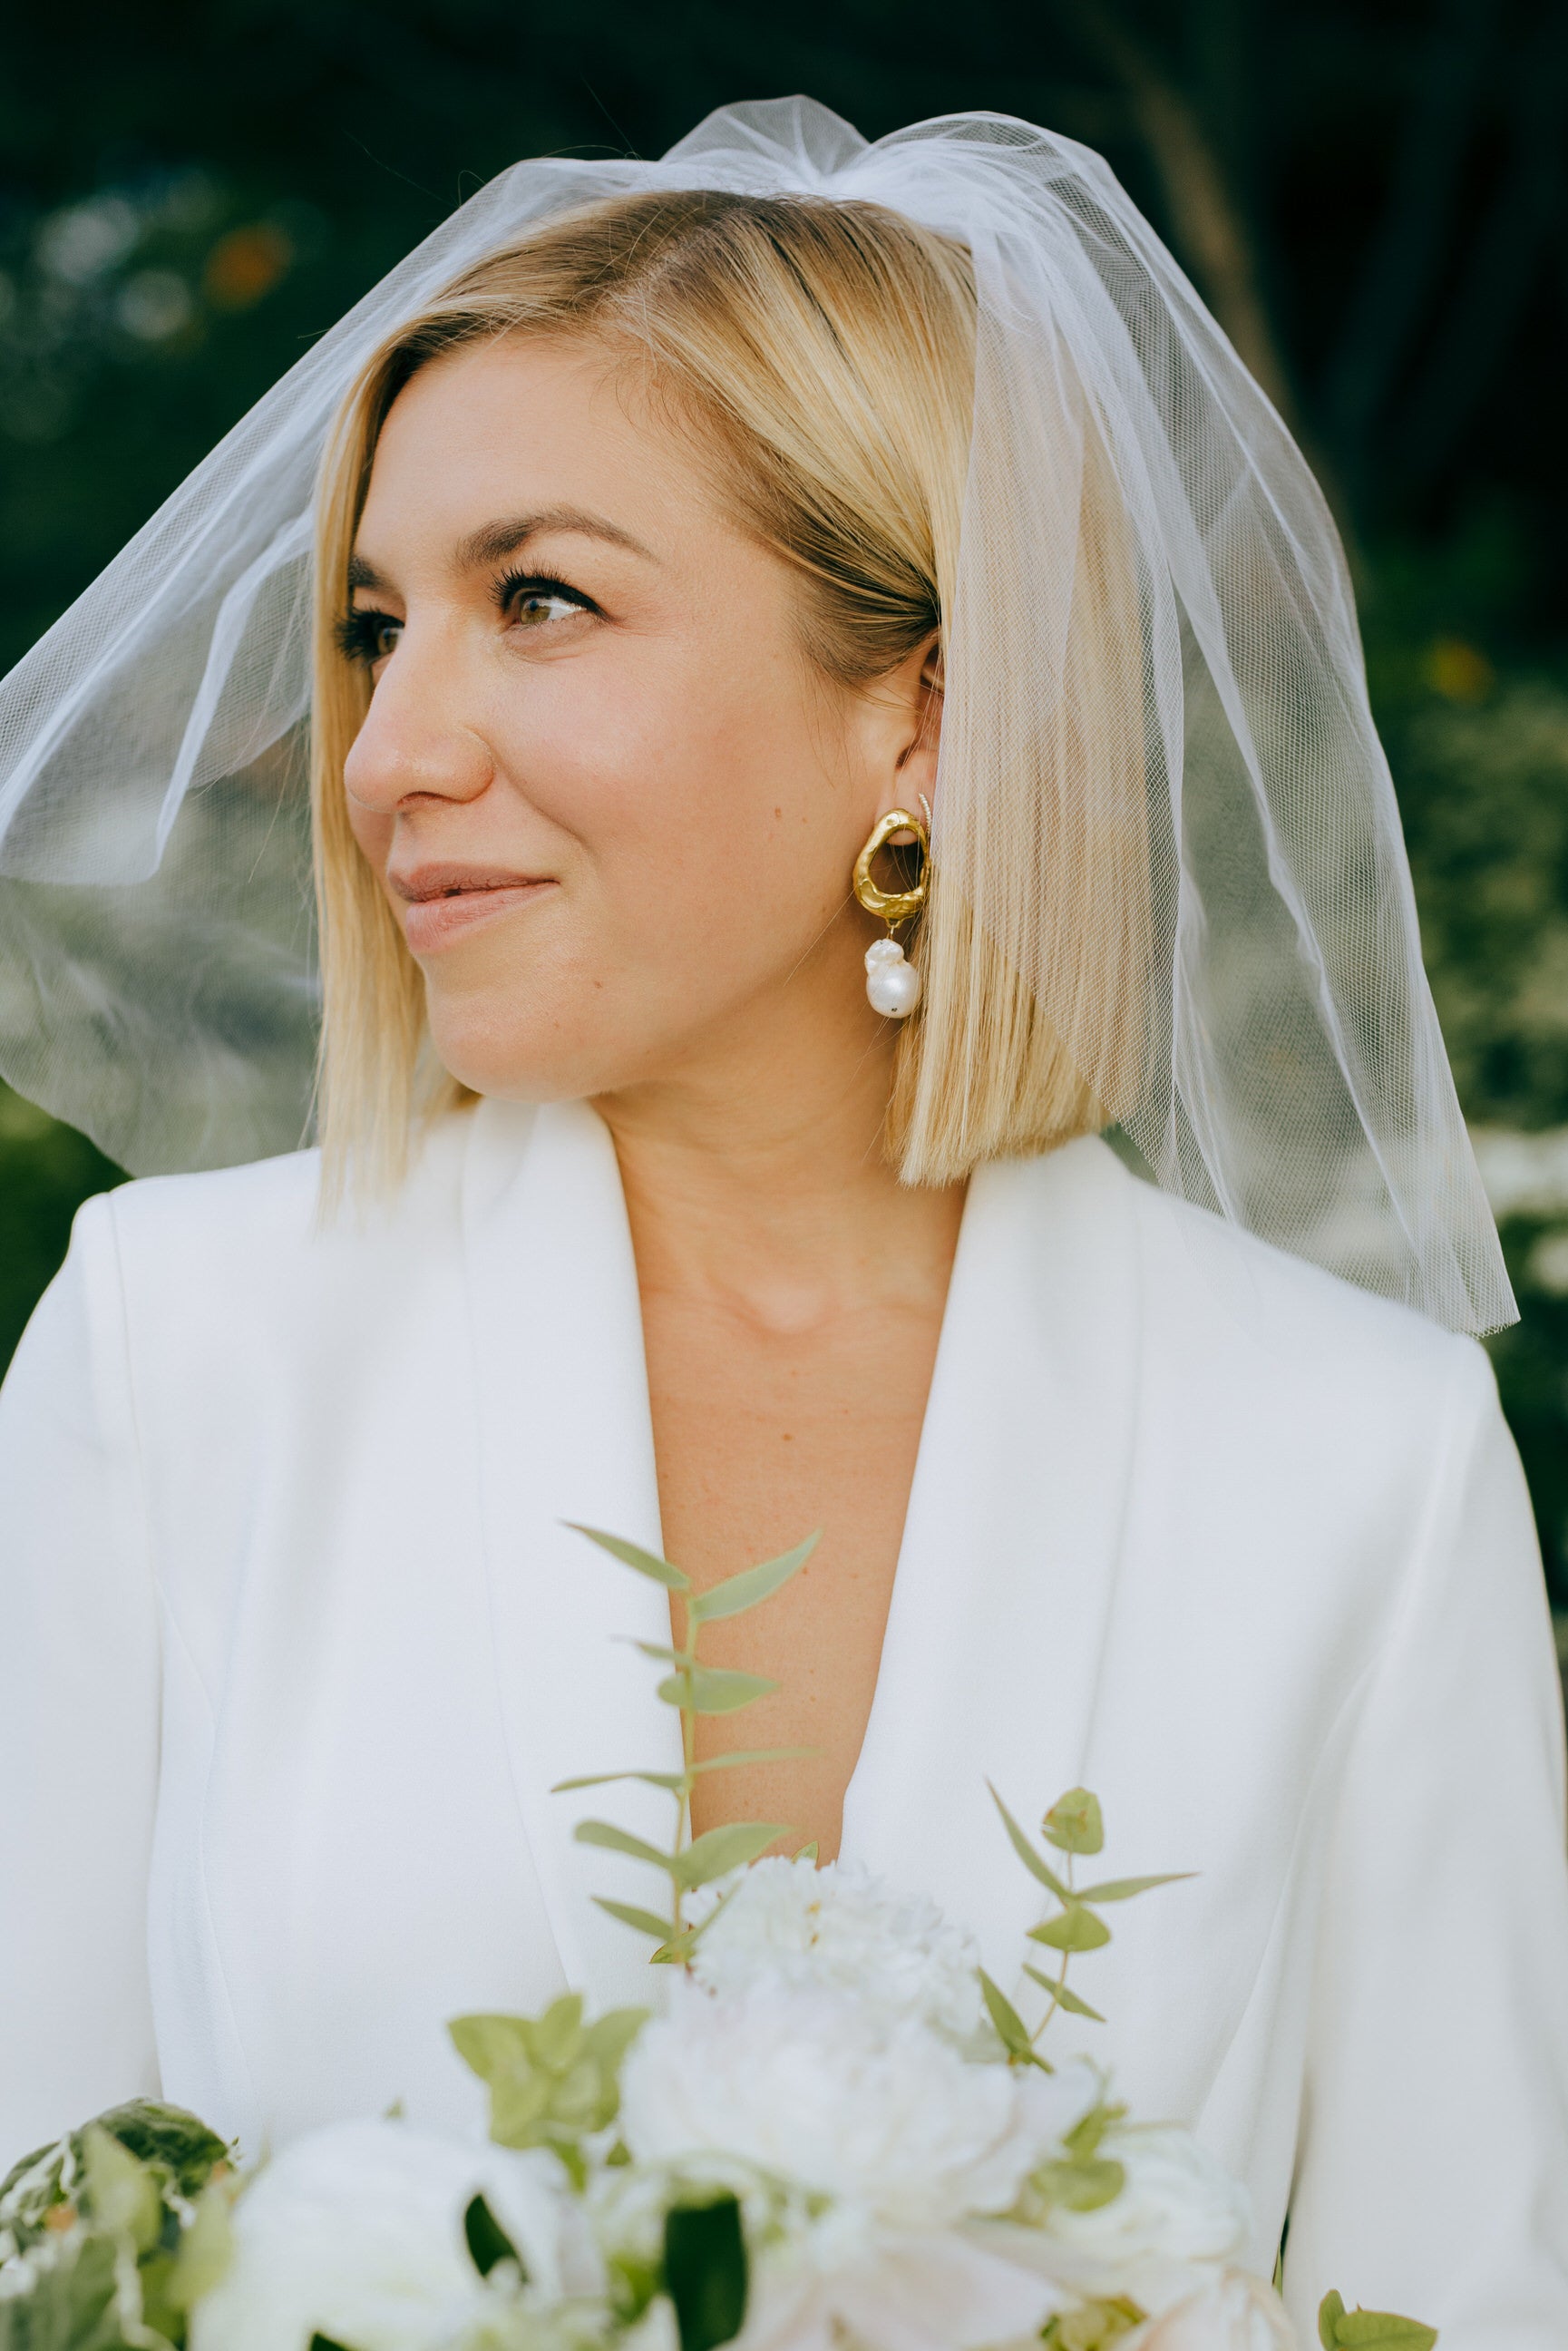 How to Wear a Wedding Veil with a Short Bob or Pixie Hairstyle